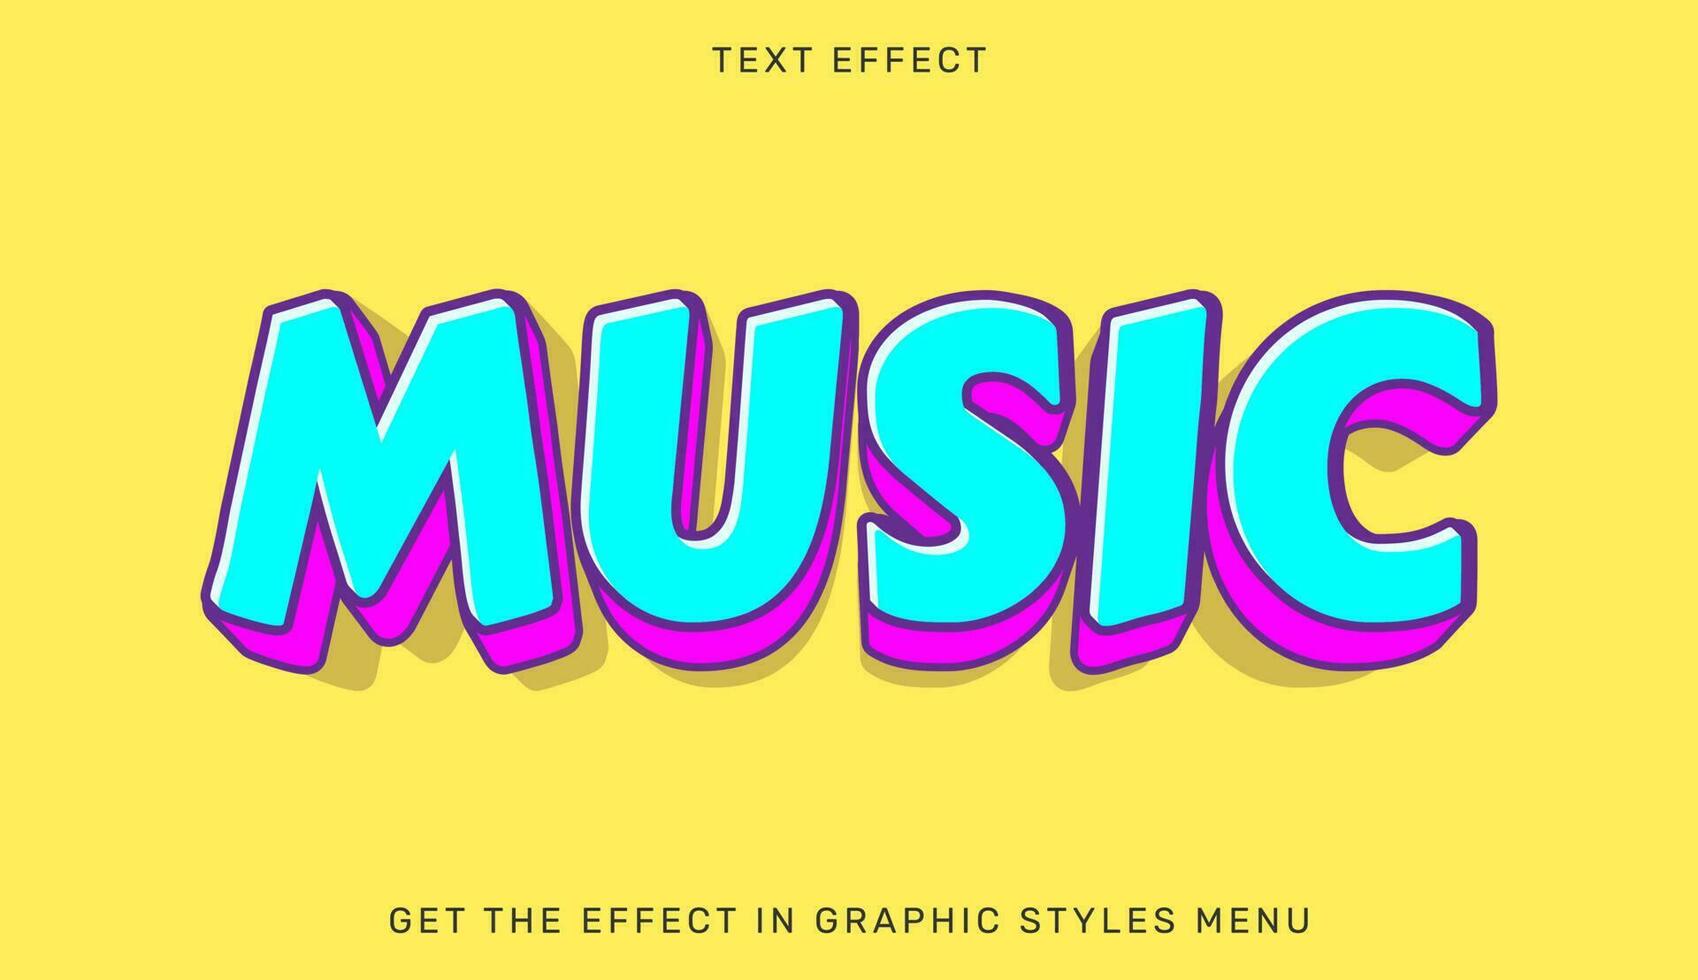 Vector illustration of music text effect